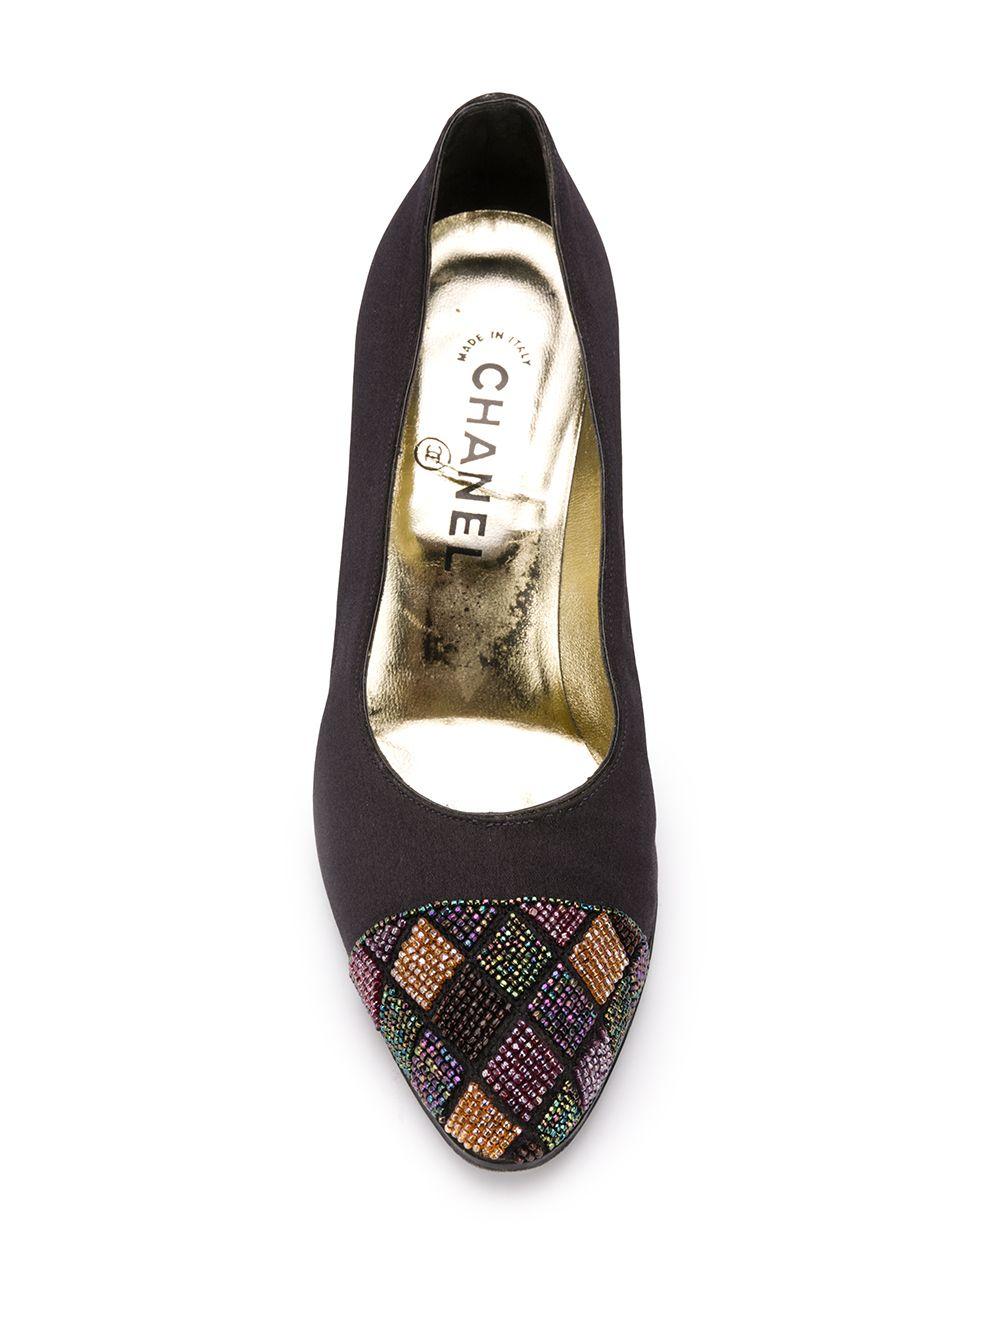 Crafted in Italy from a combination of smooth black and cream calf leather, these vintage pumps by Chanel are for the fashion forward, featuring a mid high stiletto heel, a comfortable slip-on style and a myriad of colourful, beaded embellishments